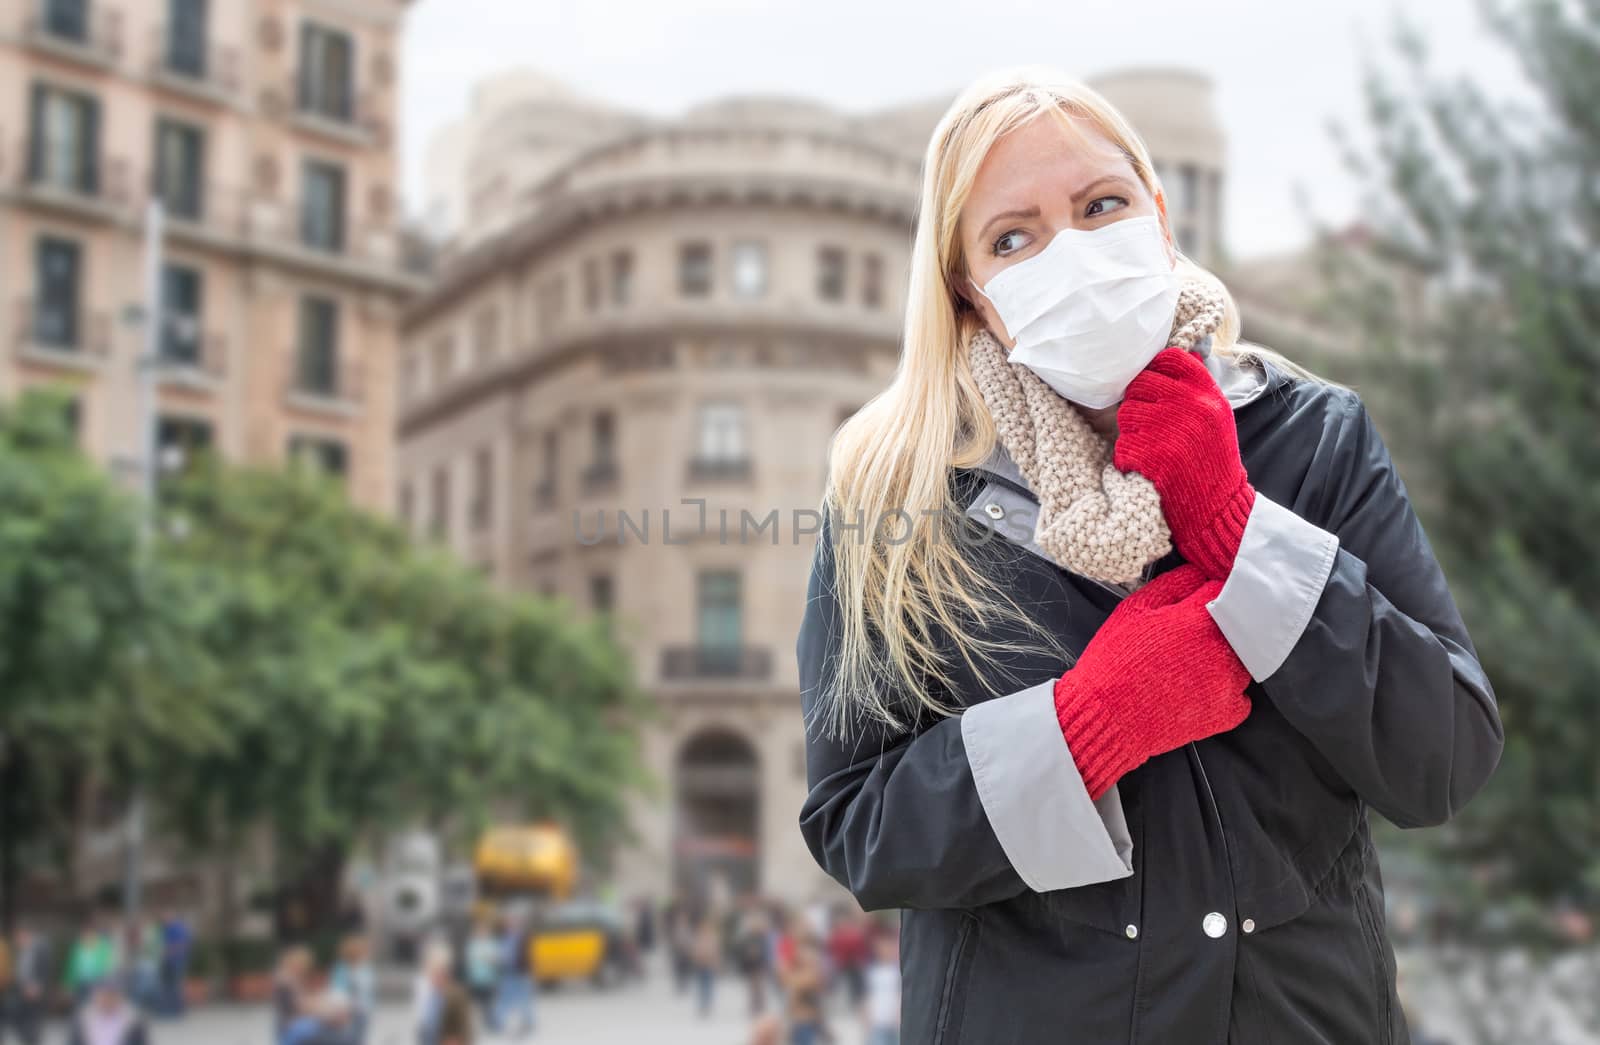 Young Woman Wearing Face Mask Walks Among The Public In Italy by Feverpitched